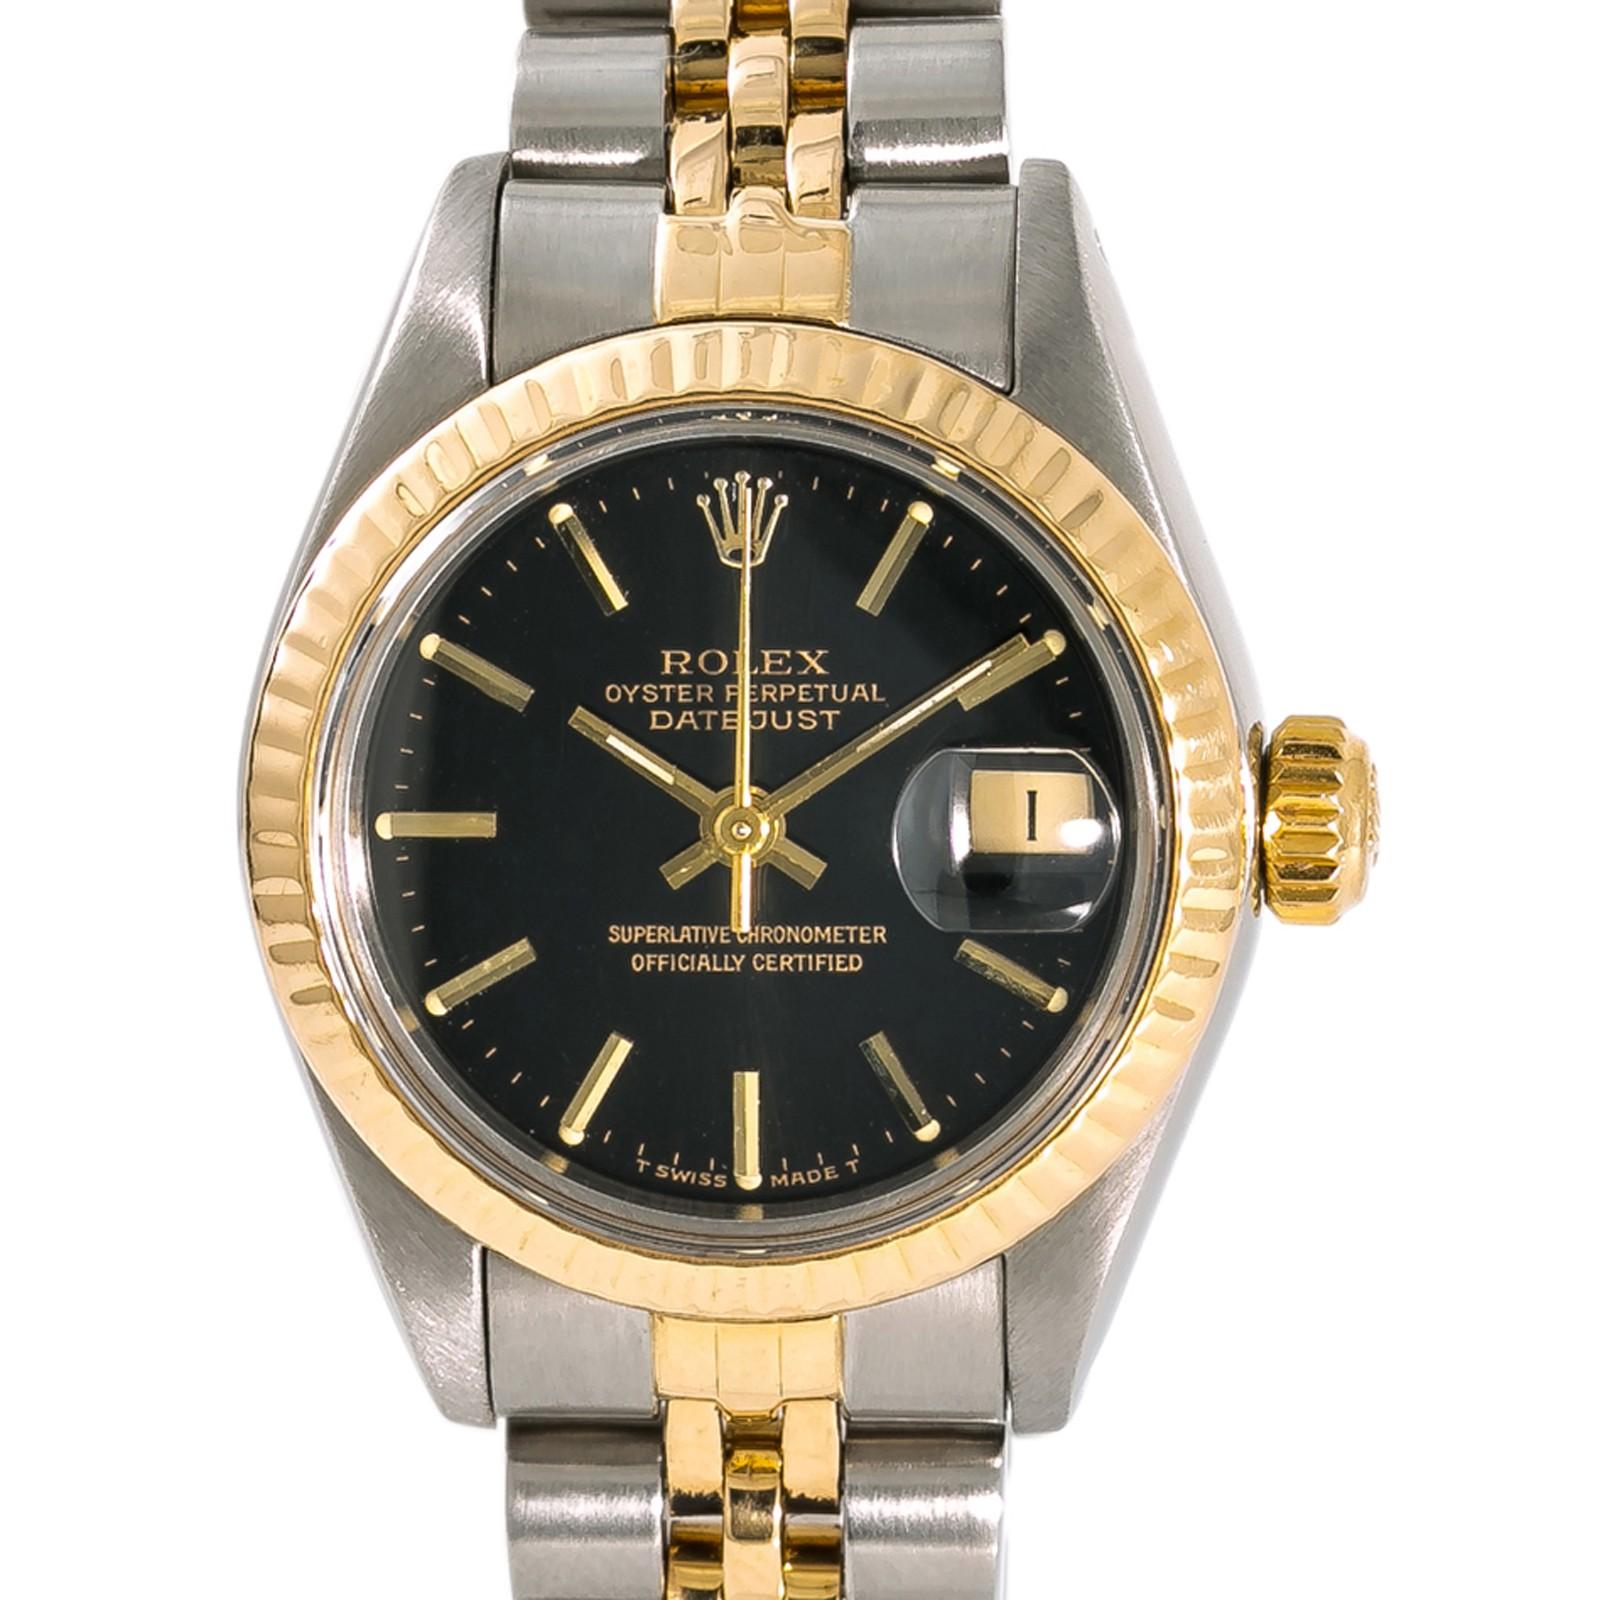 Rolex Datejust 69173, Black Dial Certified Authentic In Good Condition For Sale In Miami, FL